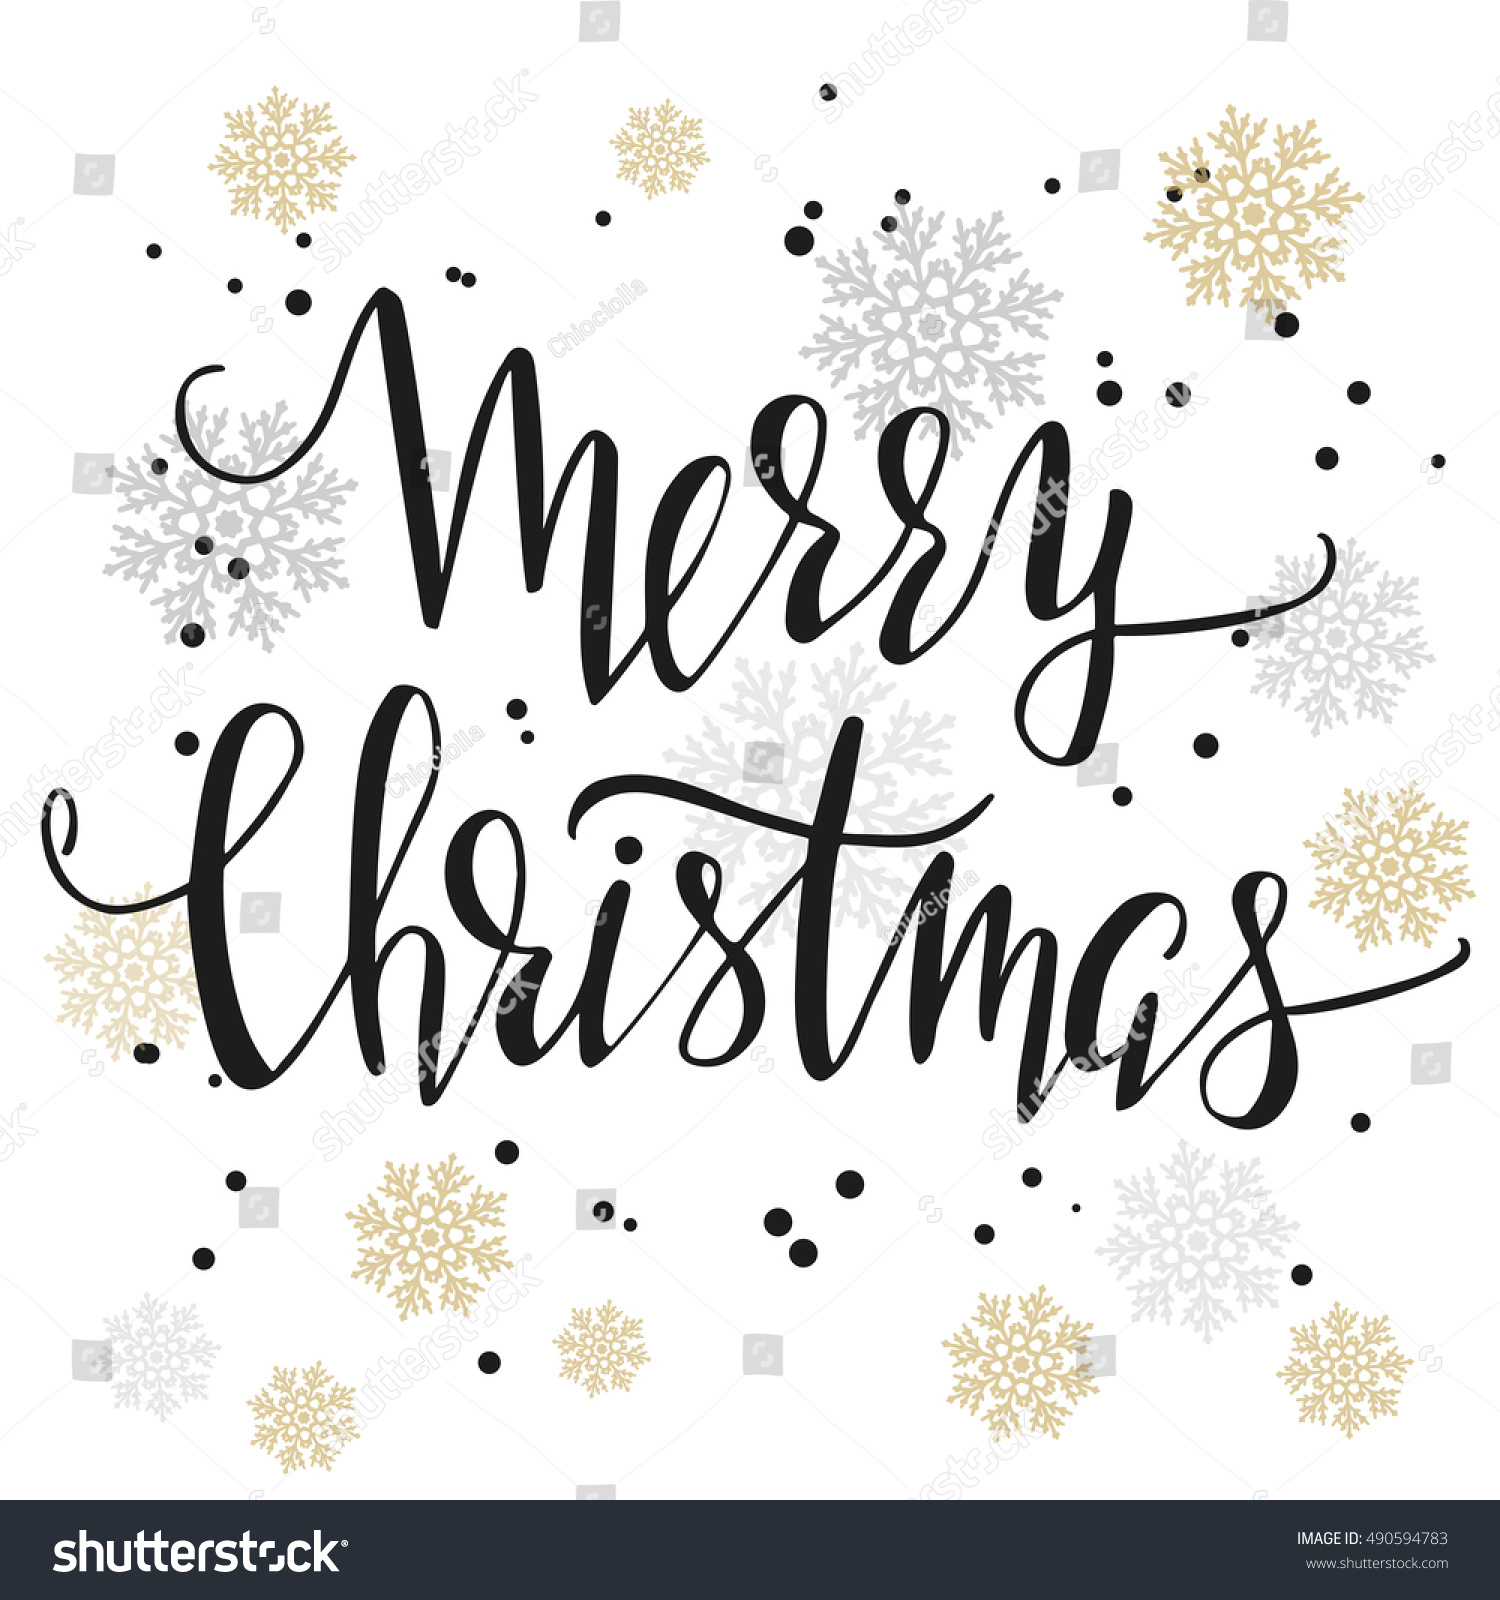 Merry Christmas. Modern Hand Lettering And Snowflakes. Stock Vector ...